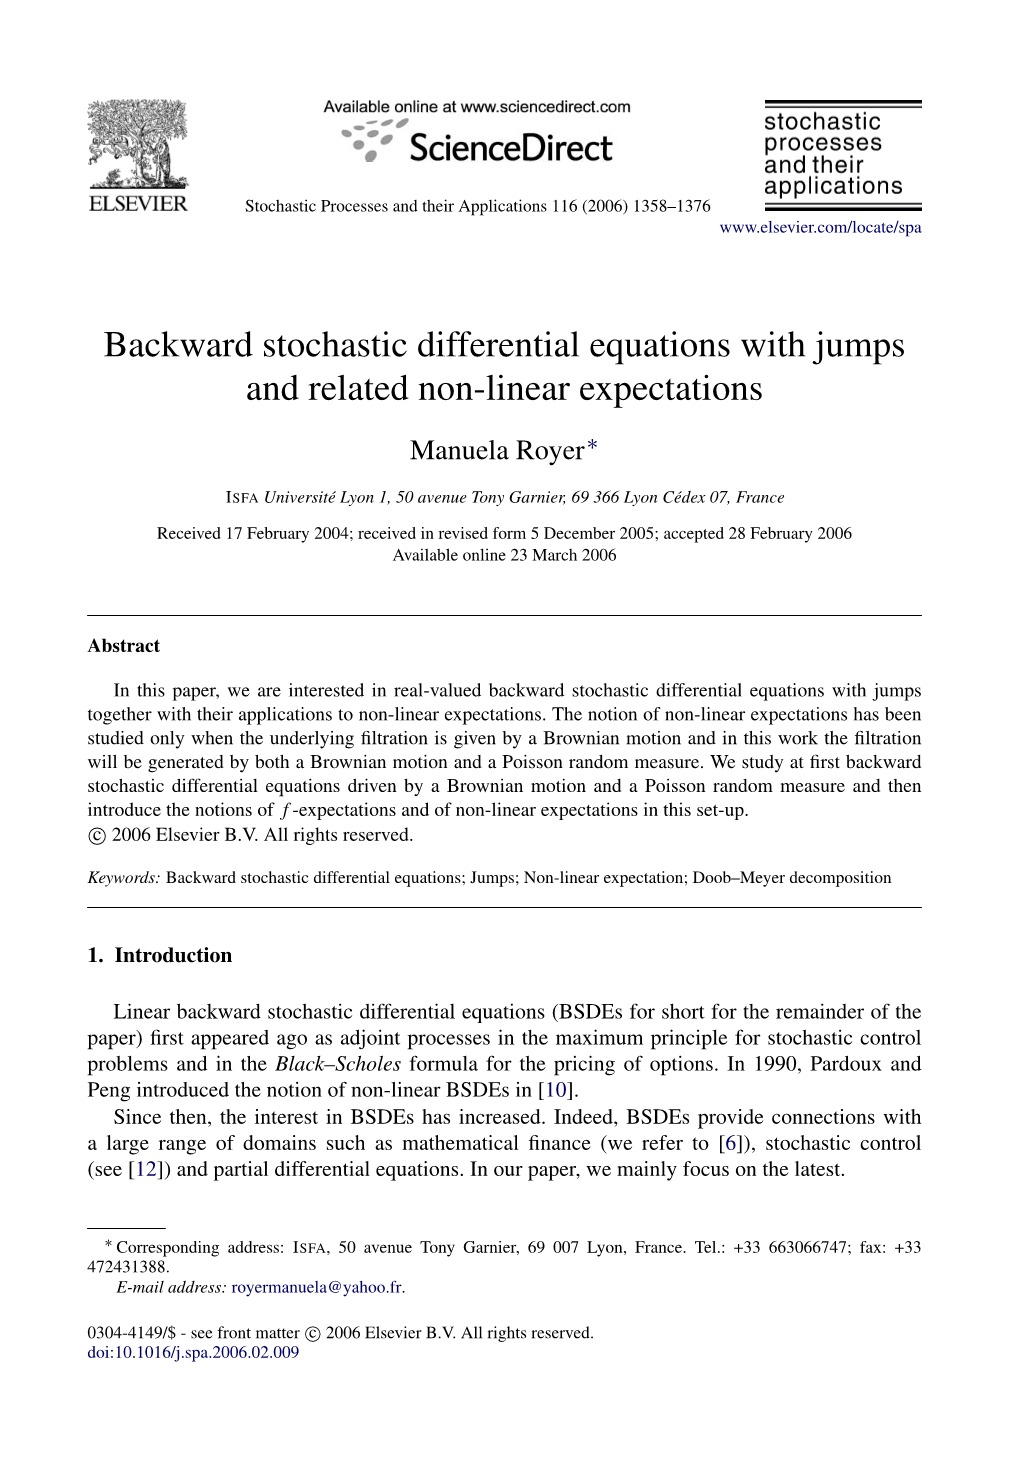 Backward Stochastic Differential Equations with Jumps and Related Non-Linear Expectations